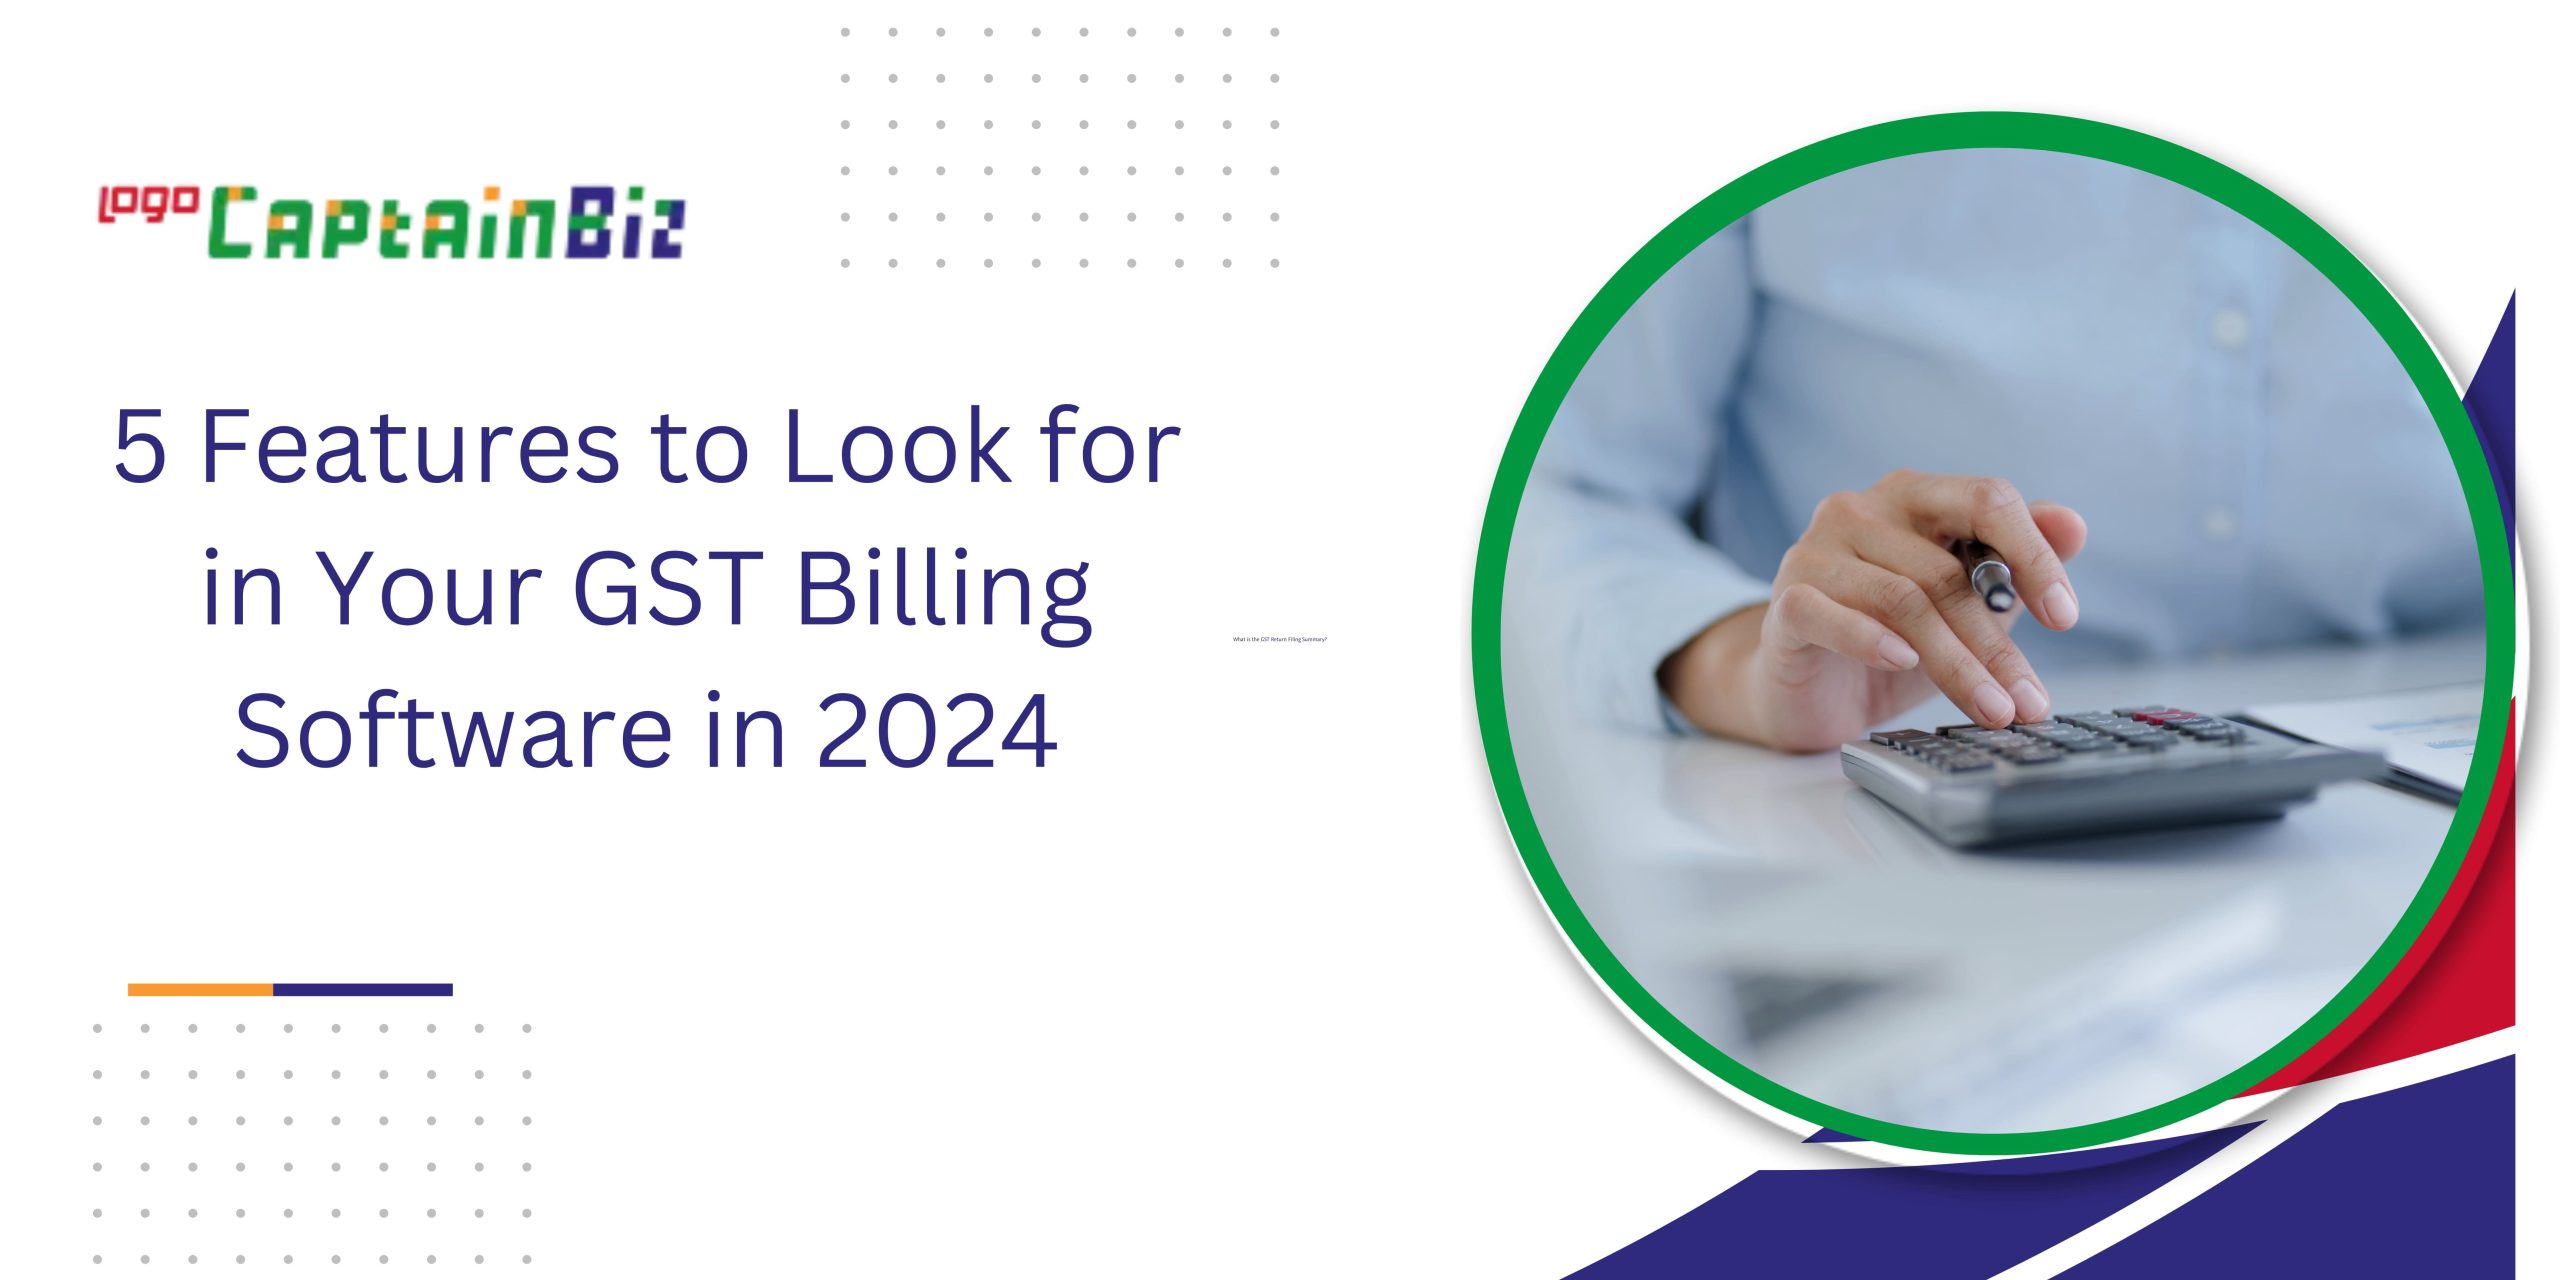 CaptainBiz: 5 Features to Look for in Your GST Billing Software in 2024